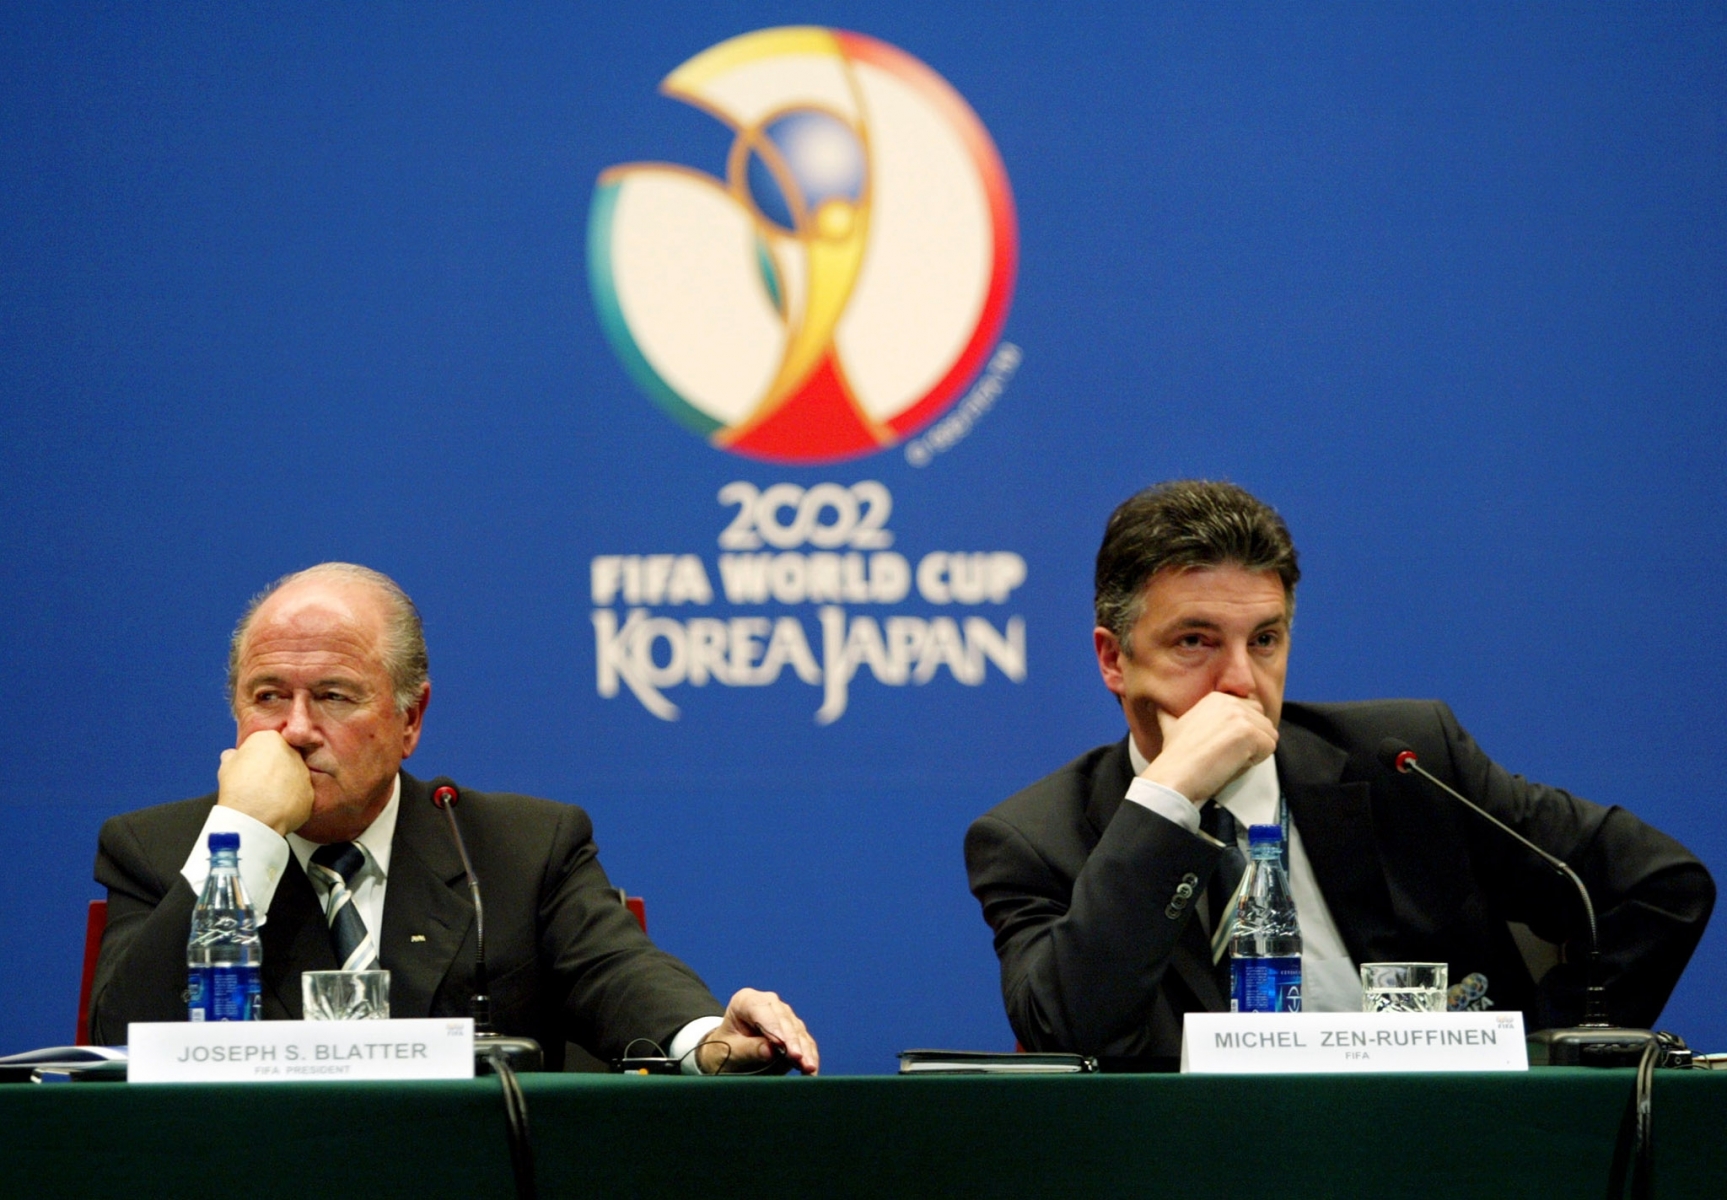 FIFA PRESIDENT SEPP BLATTER AND FIFA GENERAL SECRETARY MICHEL ZEN

RUFFINEN LISTEN DURING A NEWS CONFERENCE IN SEOUL.



 

FIFA President Sepp Blatter (L) and FIFA General Secretary Michel

Zen-Ruffinen attend a press conference following a meeting of the FIFA

Executive Committee in Seoul, South Korea May 26, 2002. Blatter looks

set to be re-elected FIFA president for a second four-year term on

Wednesday by between 40 and 50 votes - and possibly more. Despite

facing criminal charges of corruption in the Swiss courts and

allegations of financial mismanagement during his first four years as

president, Blatter has arrived in Asia full of confidence about the

outcome of the vote by FIFA's 204 member associations at their Congress

in Seoul. REUTERS/Shaun BestZEN RUFFINEN SPORT SOCCER WORLD